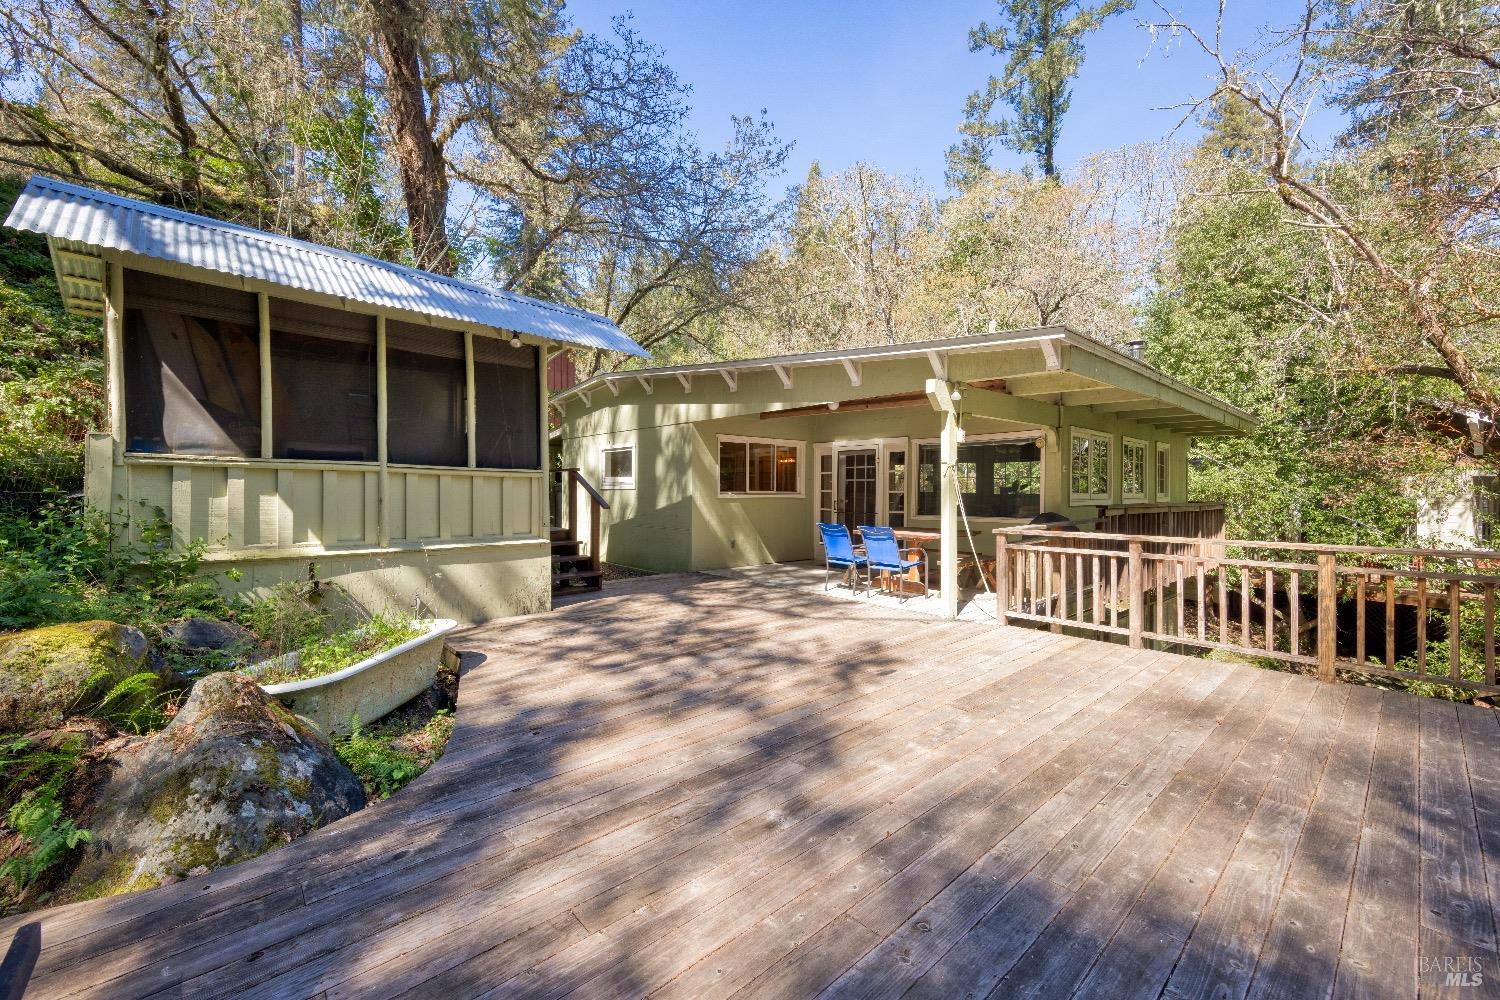 Photo of 8 Hahn Rd in Cazadero, CA